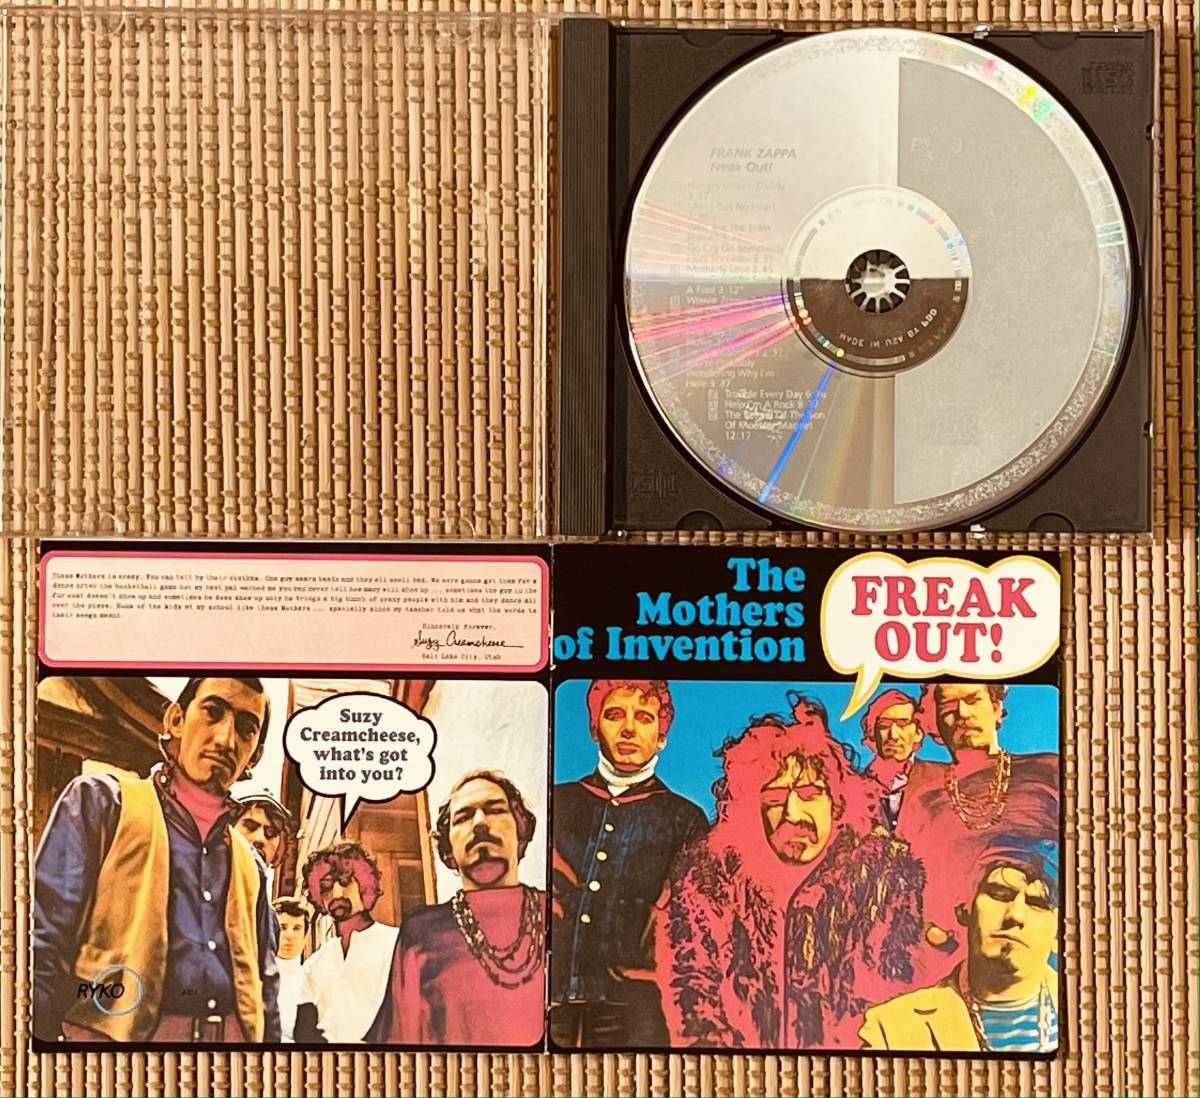 FRANK ZAPPA即決送料無料、FREAK OUT、フリークアウト、Zappa公式デビューアルバム、The Mothers of Invention、1964年、海外盤、